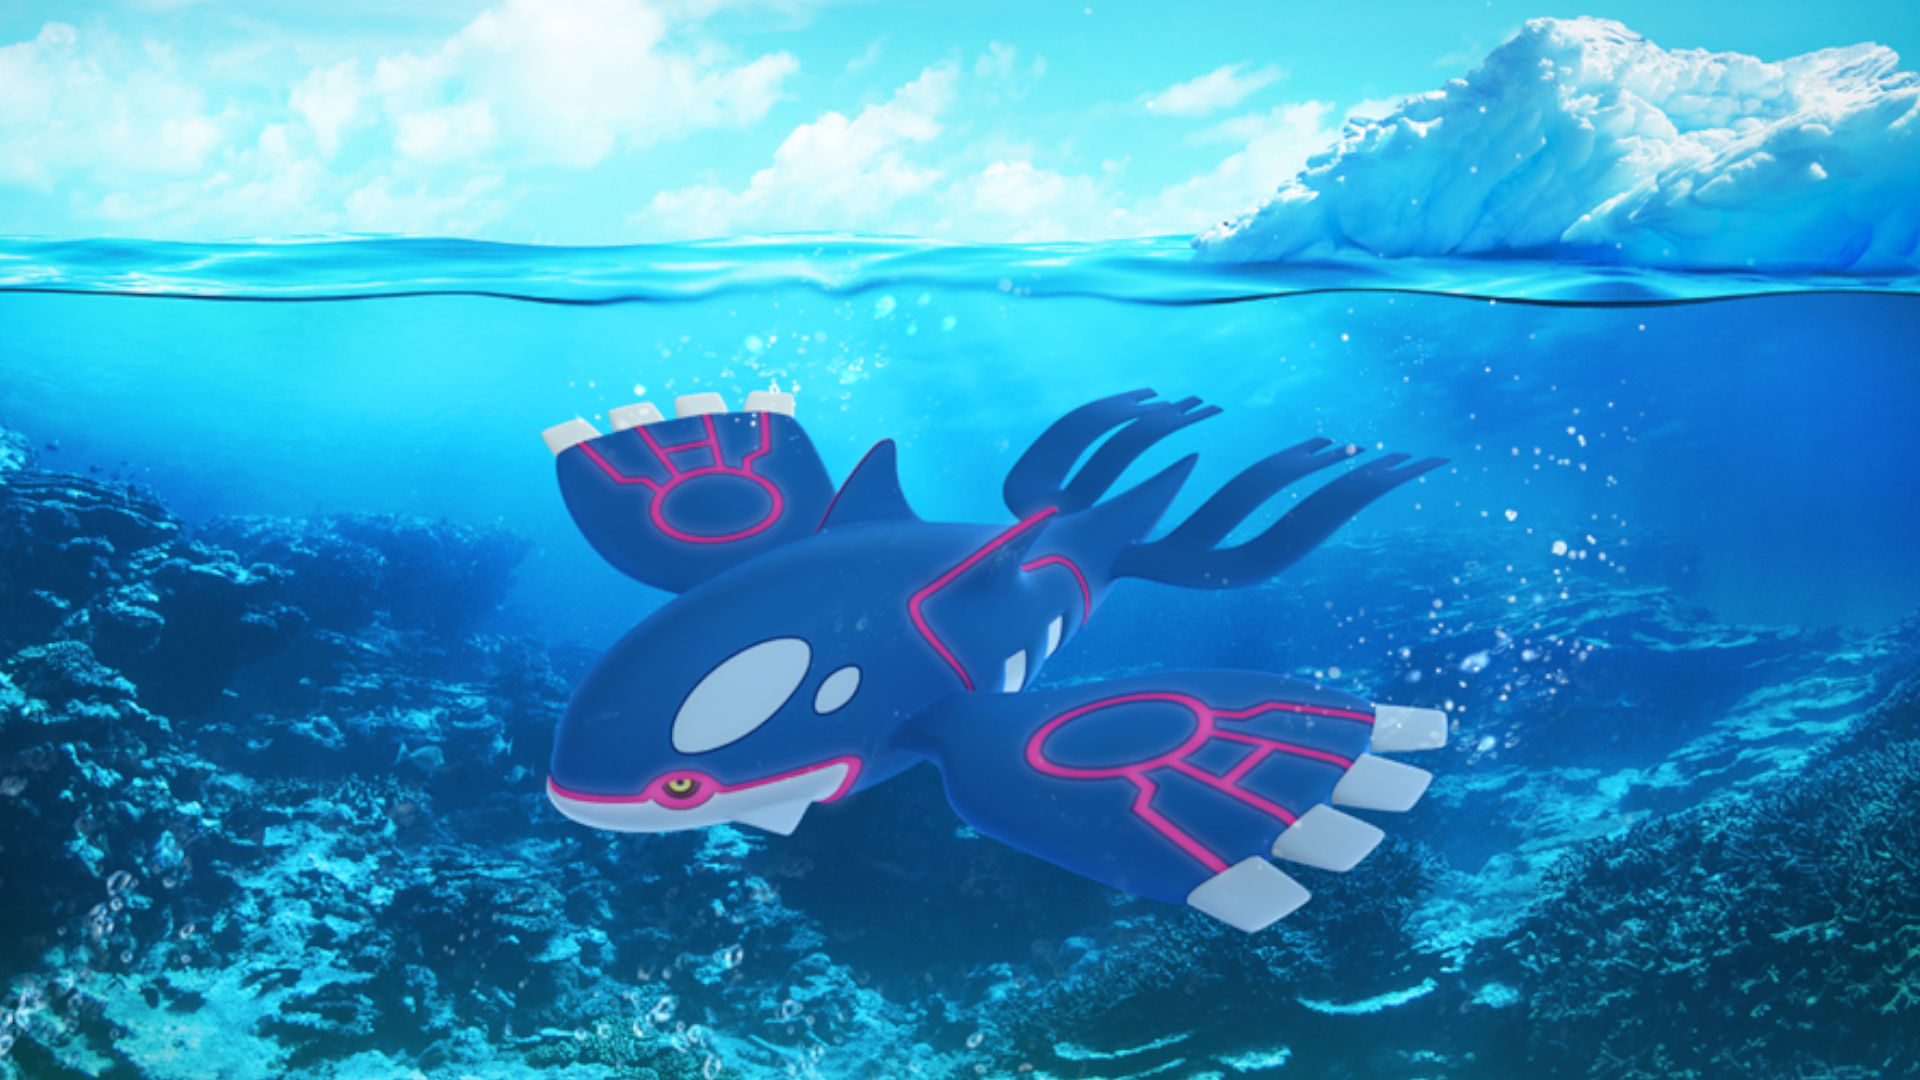 The Super powered Hydro Vortex!, Pokémon, Your Water-type Pokémon deserve  an oceanic boost! Give your Pokémon a Waterium Z to power-up Water-type  damage moves to the super powered Hydro Vortex!